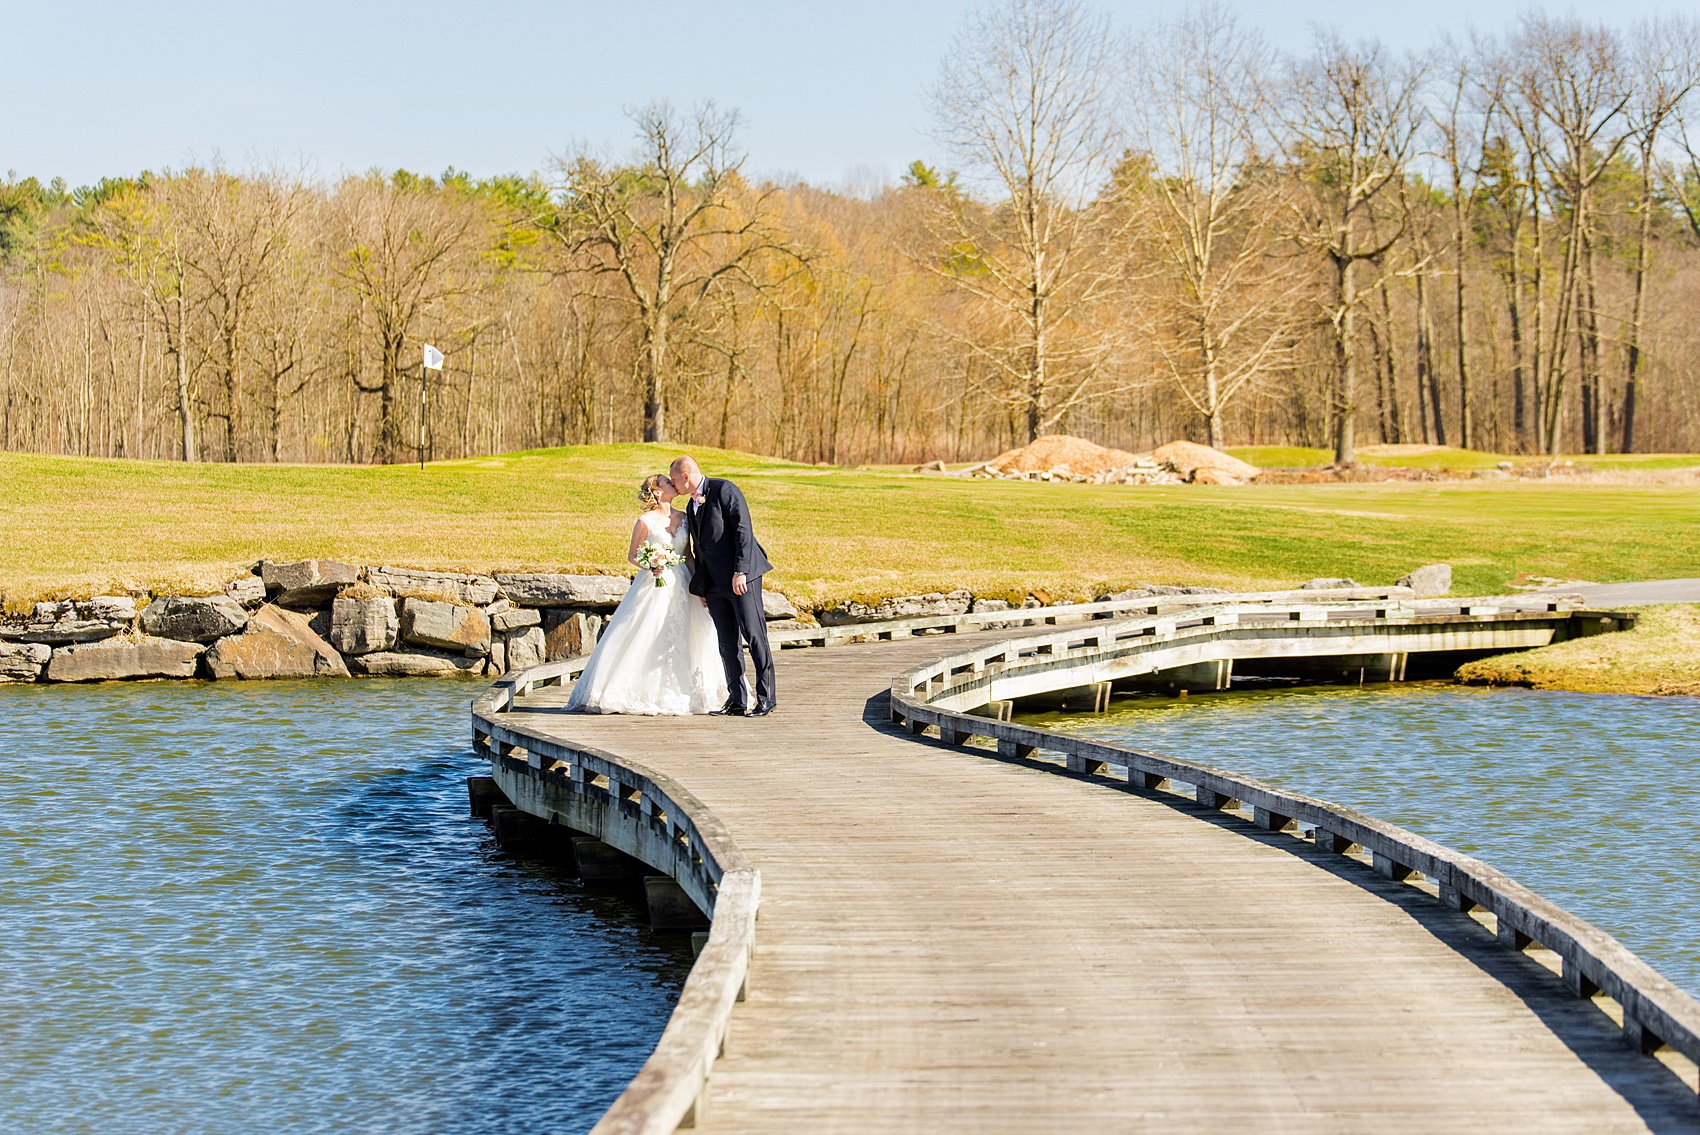 Saratoga Springs destination wedding photos by Mikkel Paige Photography. The bride and groom share a kiss on the bridge surrounded by spring greenery for their reception held at Saratoga National Golf Club venue. #SaratogaSpringsNY #SaratogaSprings #mikkelpaige #NYwedding #destinationwedding